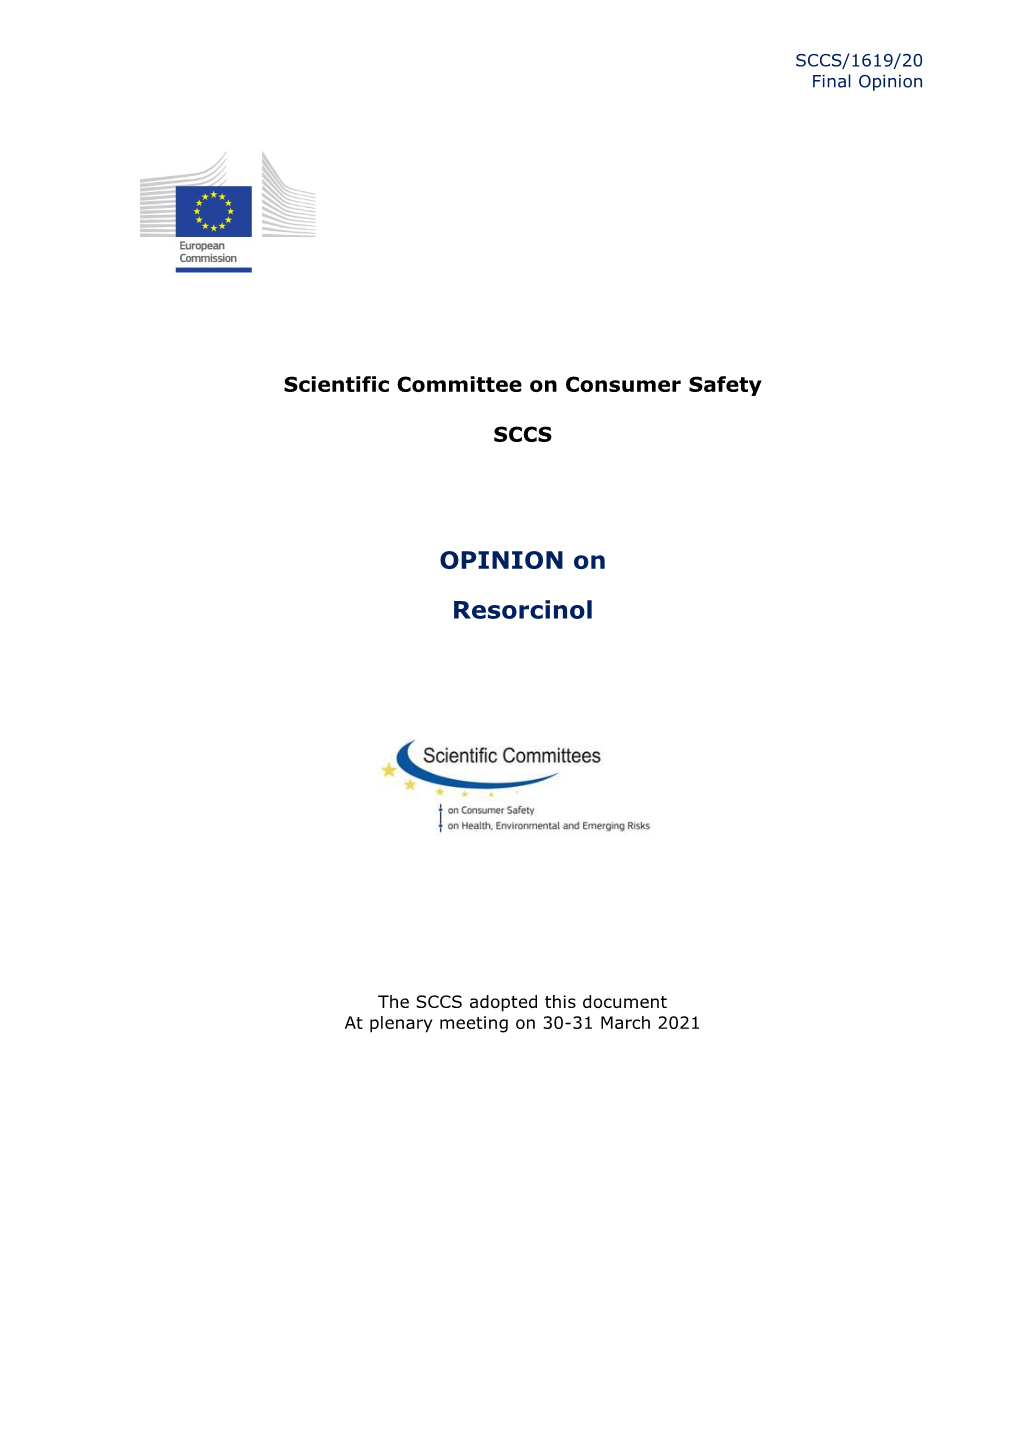 Opinion of the Scientific Committee on Consumer Safety on Resorcinol